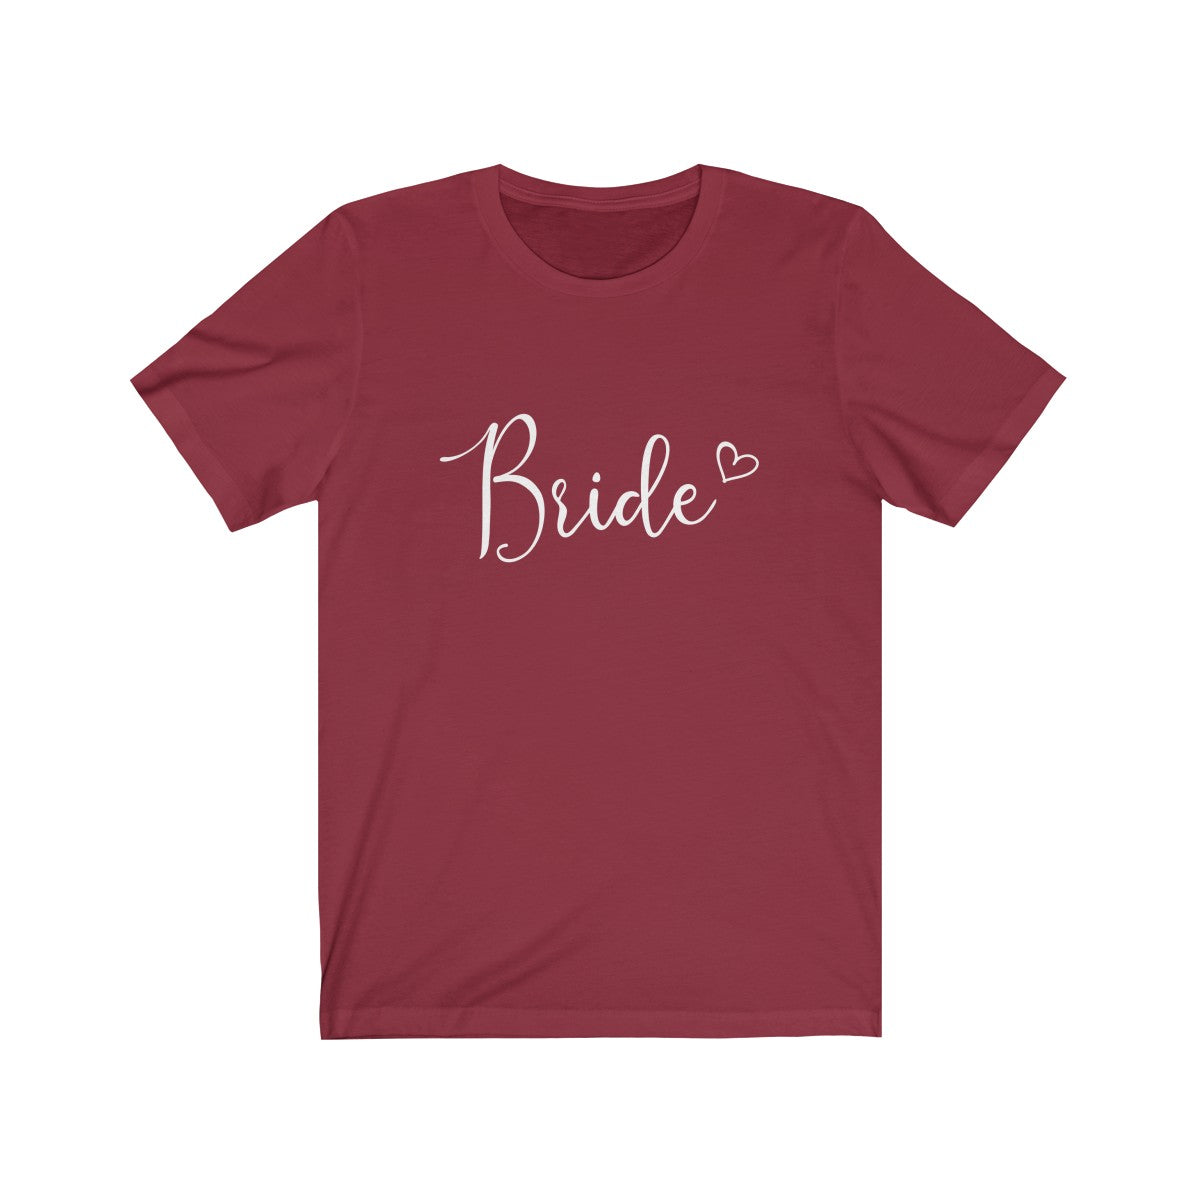 Tee Bride Heart white lettering - elrileygifts